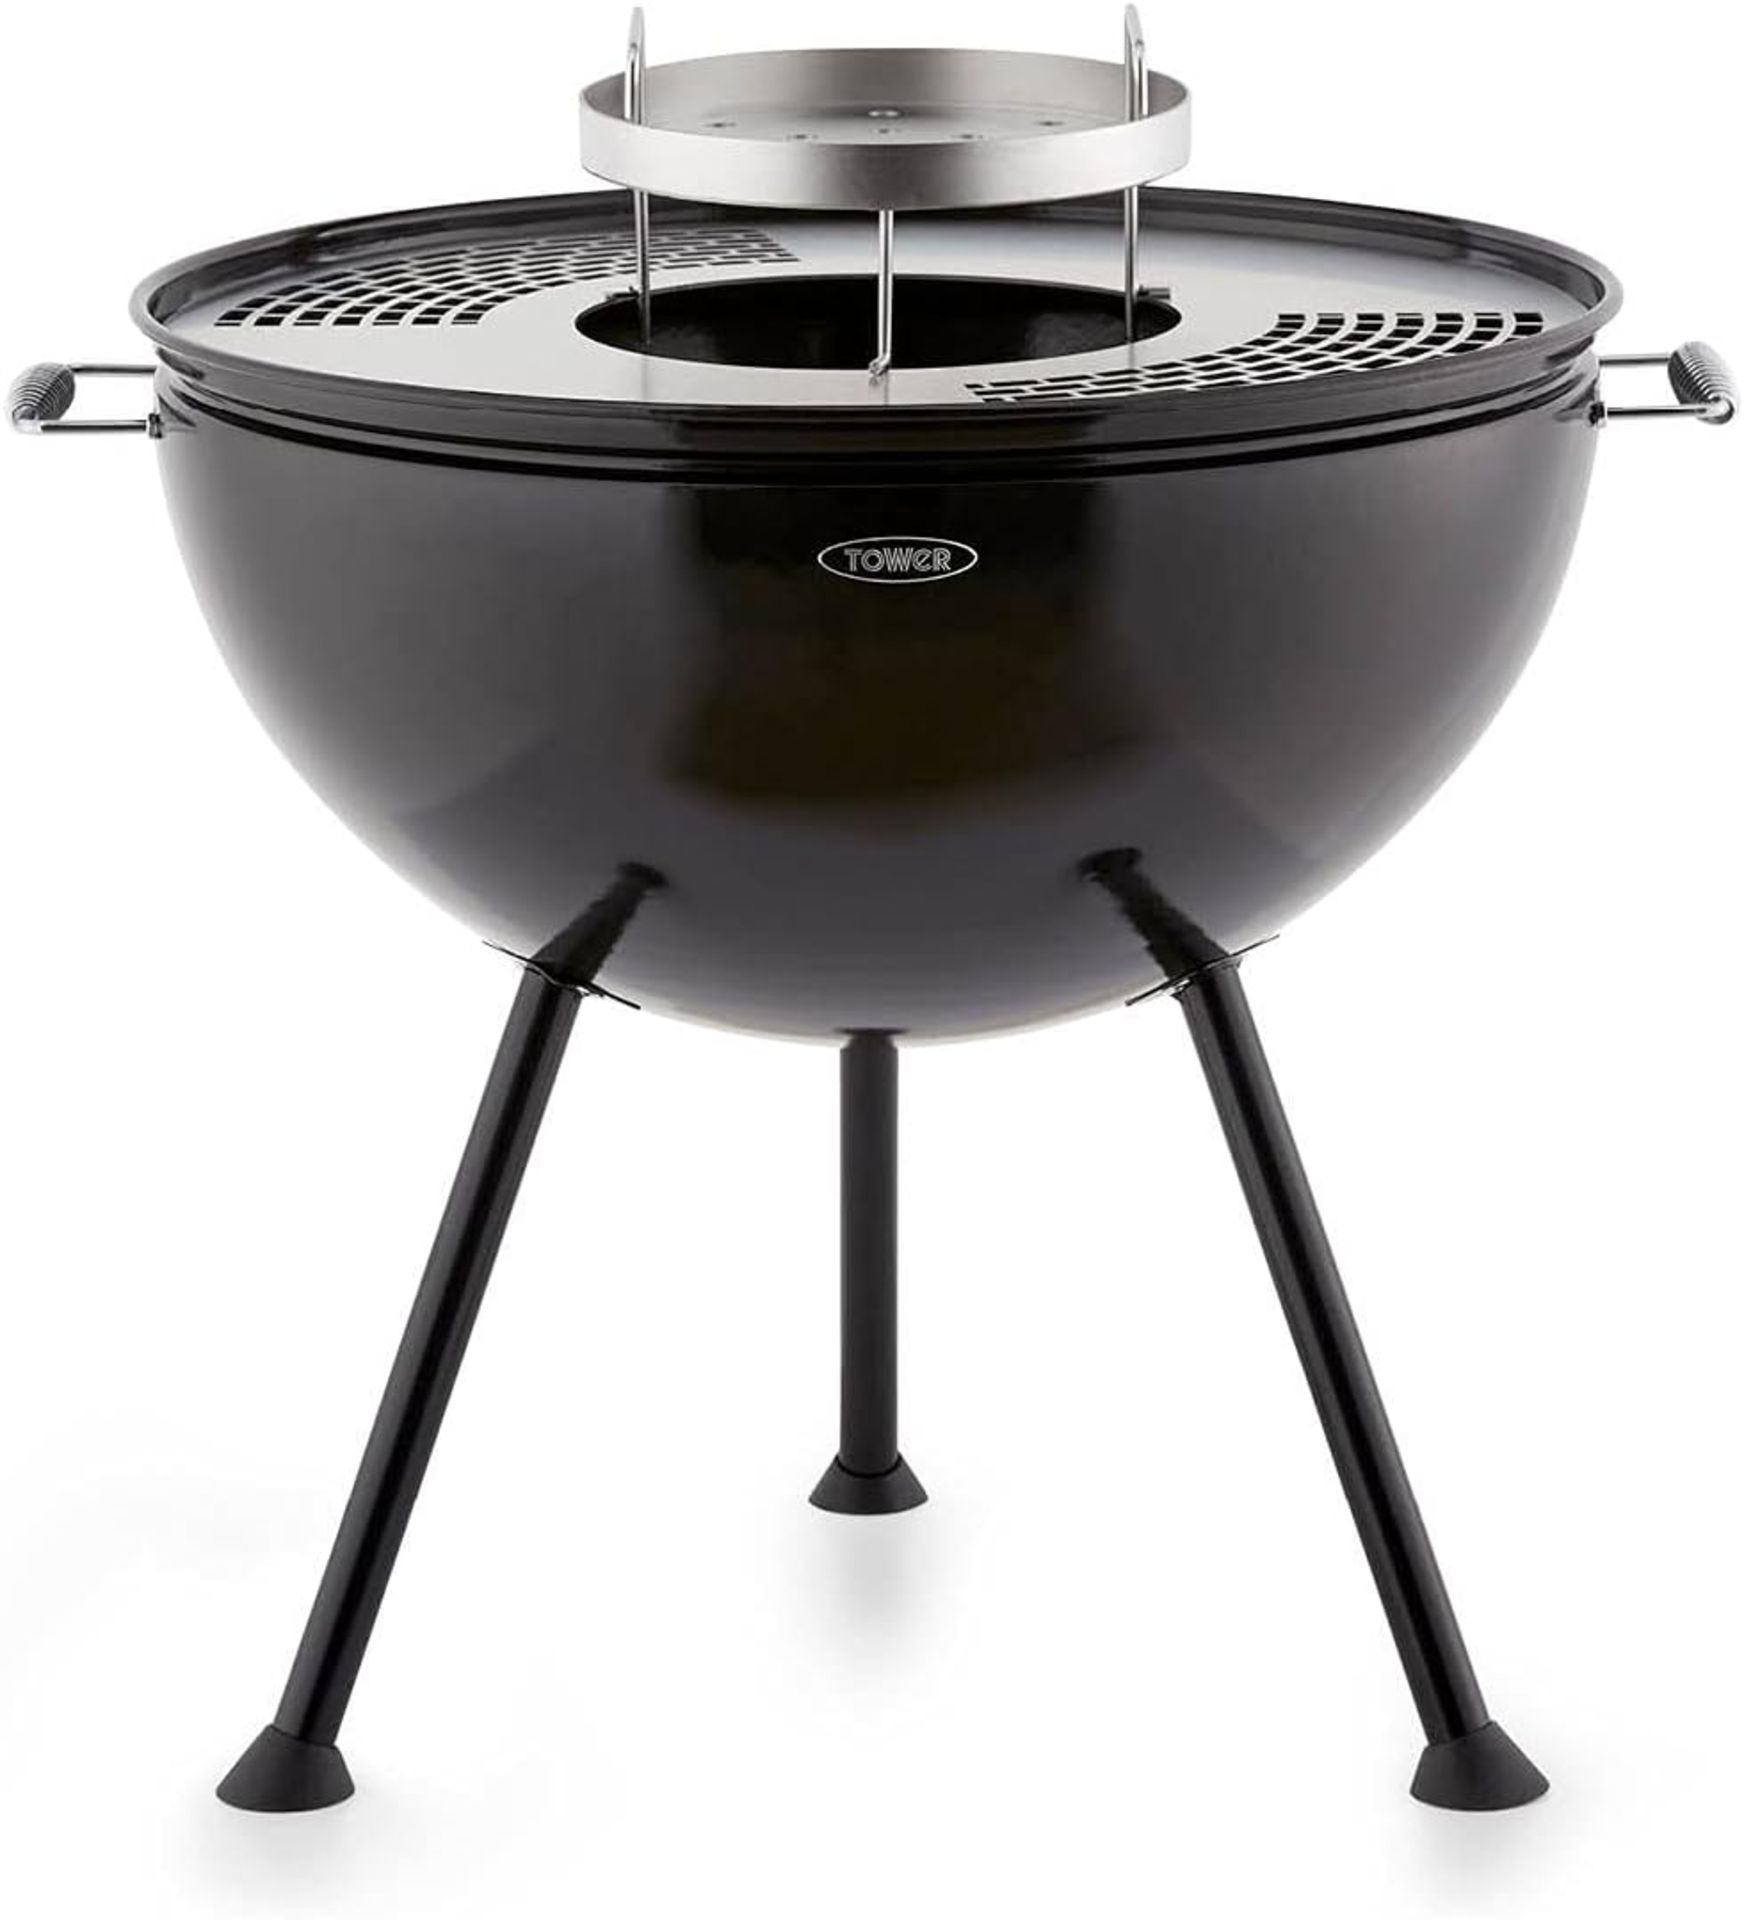 New & Boxed Tower Sphere Fire Pit and BBQ Grill, Black. (VQ577). DUAL USE â€“ This multi- - Image 2 of 6